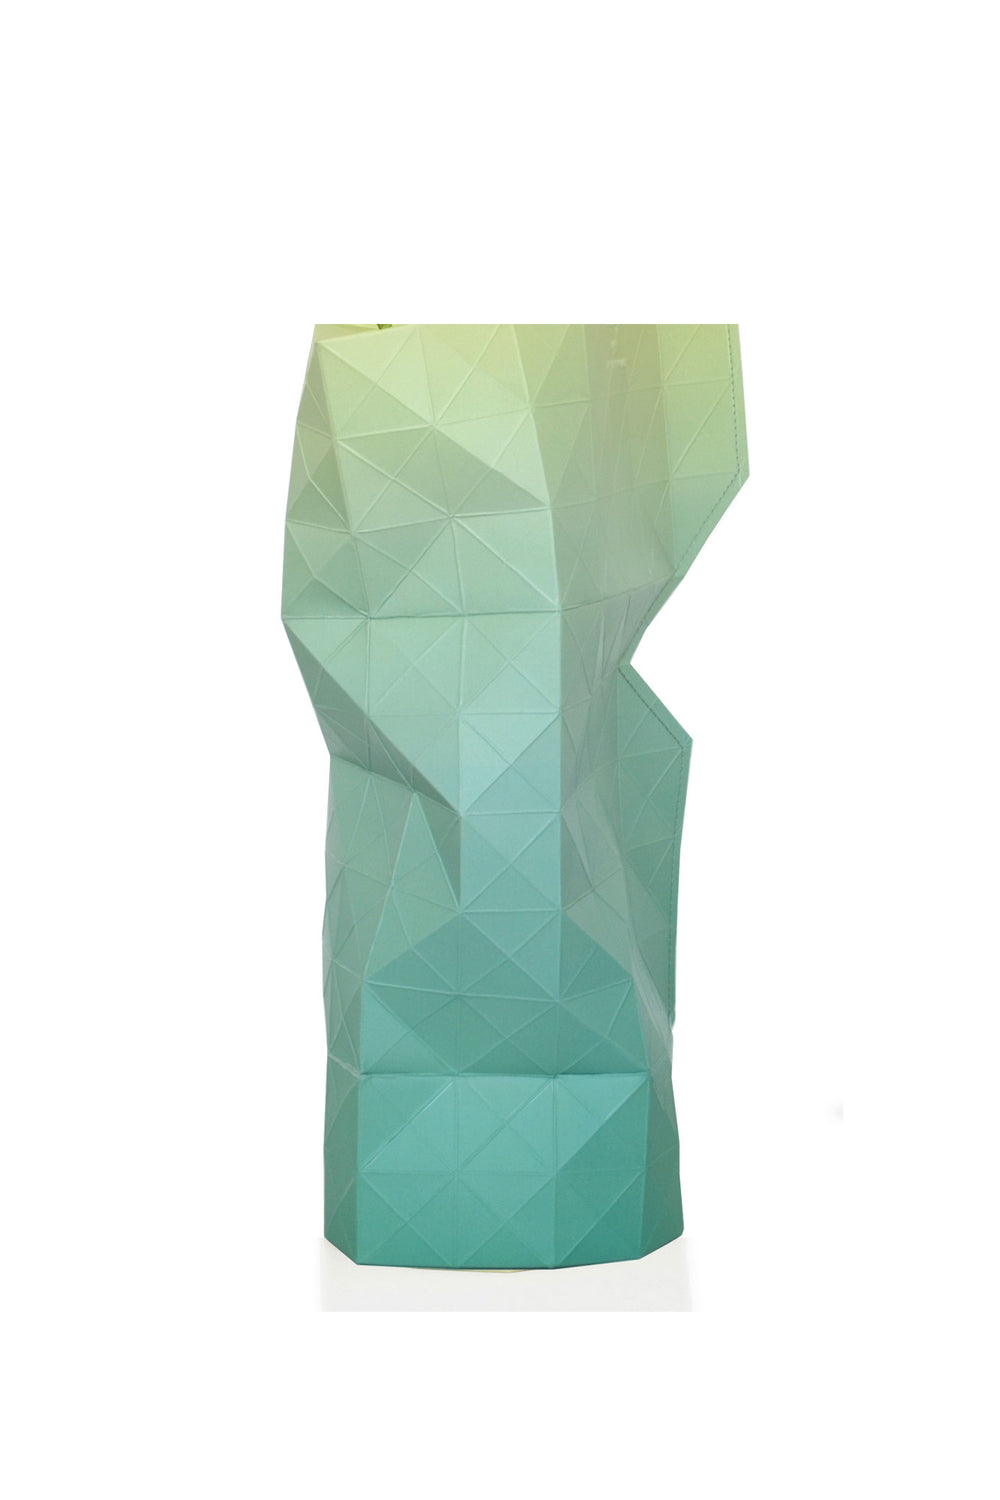 Large Green Fade Vase Cover, Vase, Tiny Miracles - 3LittlePicks